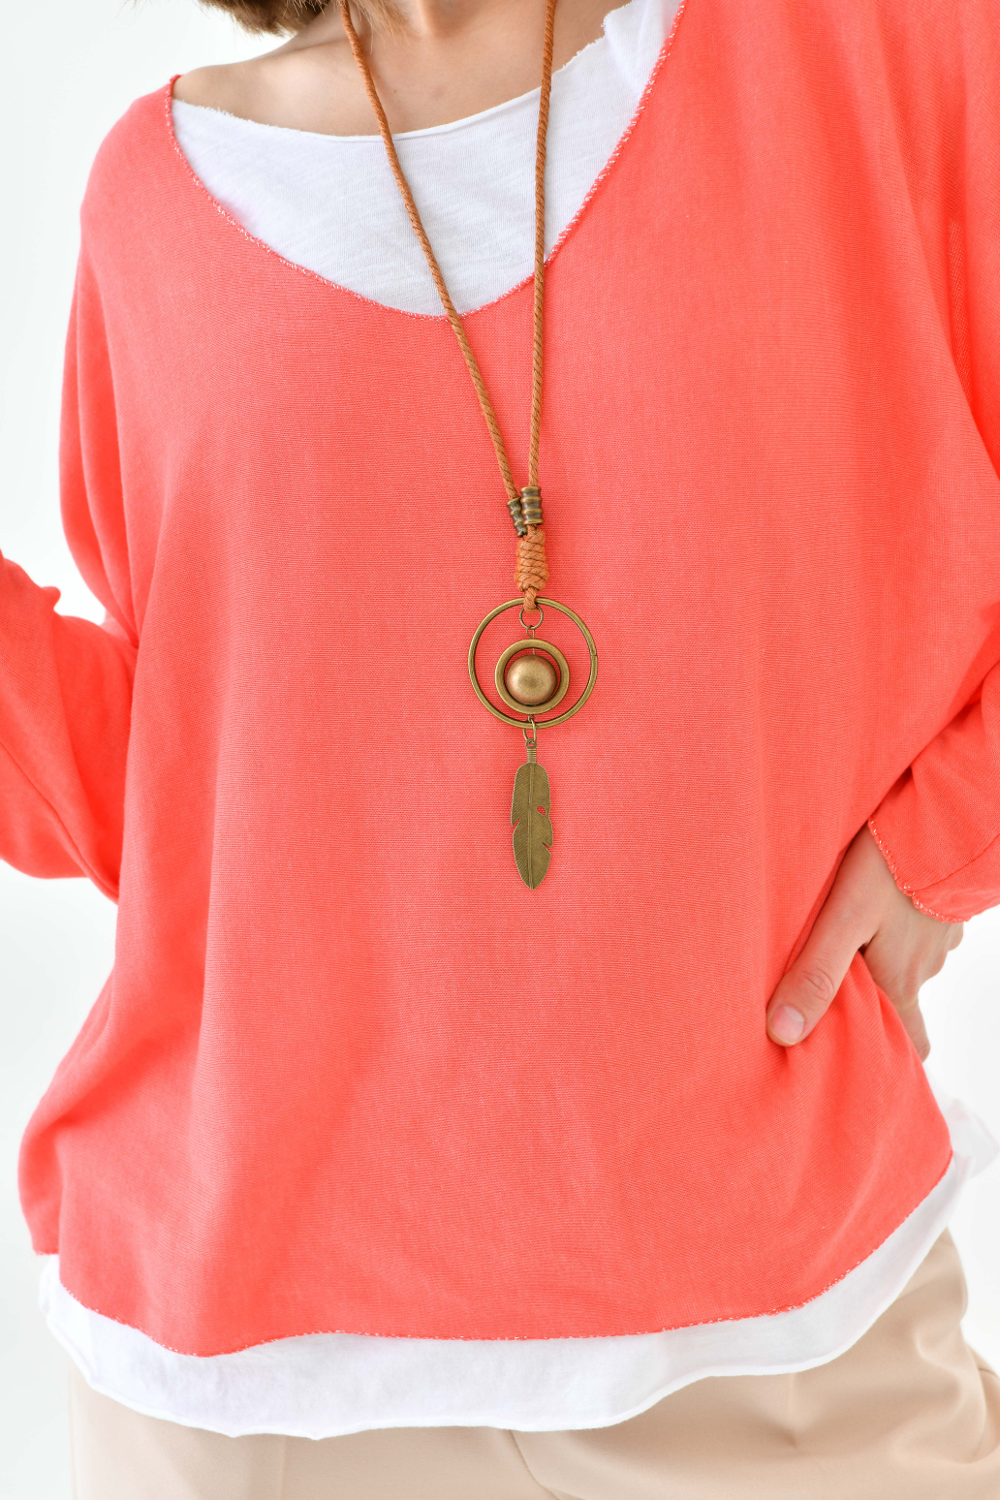 Oversized Long Sleeve Layered Blouse With Necklace In Coral And White 0172BLOUSECORALNECKLACE